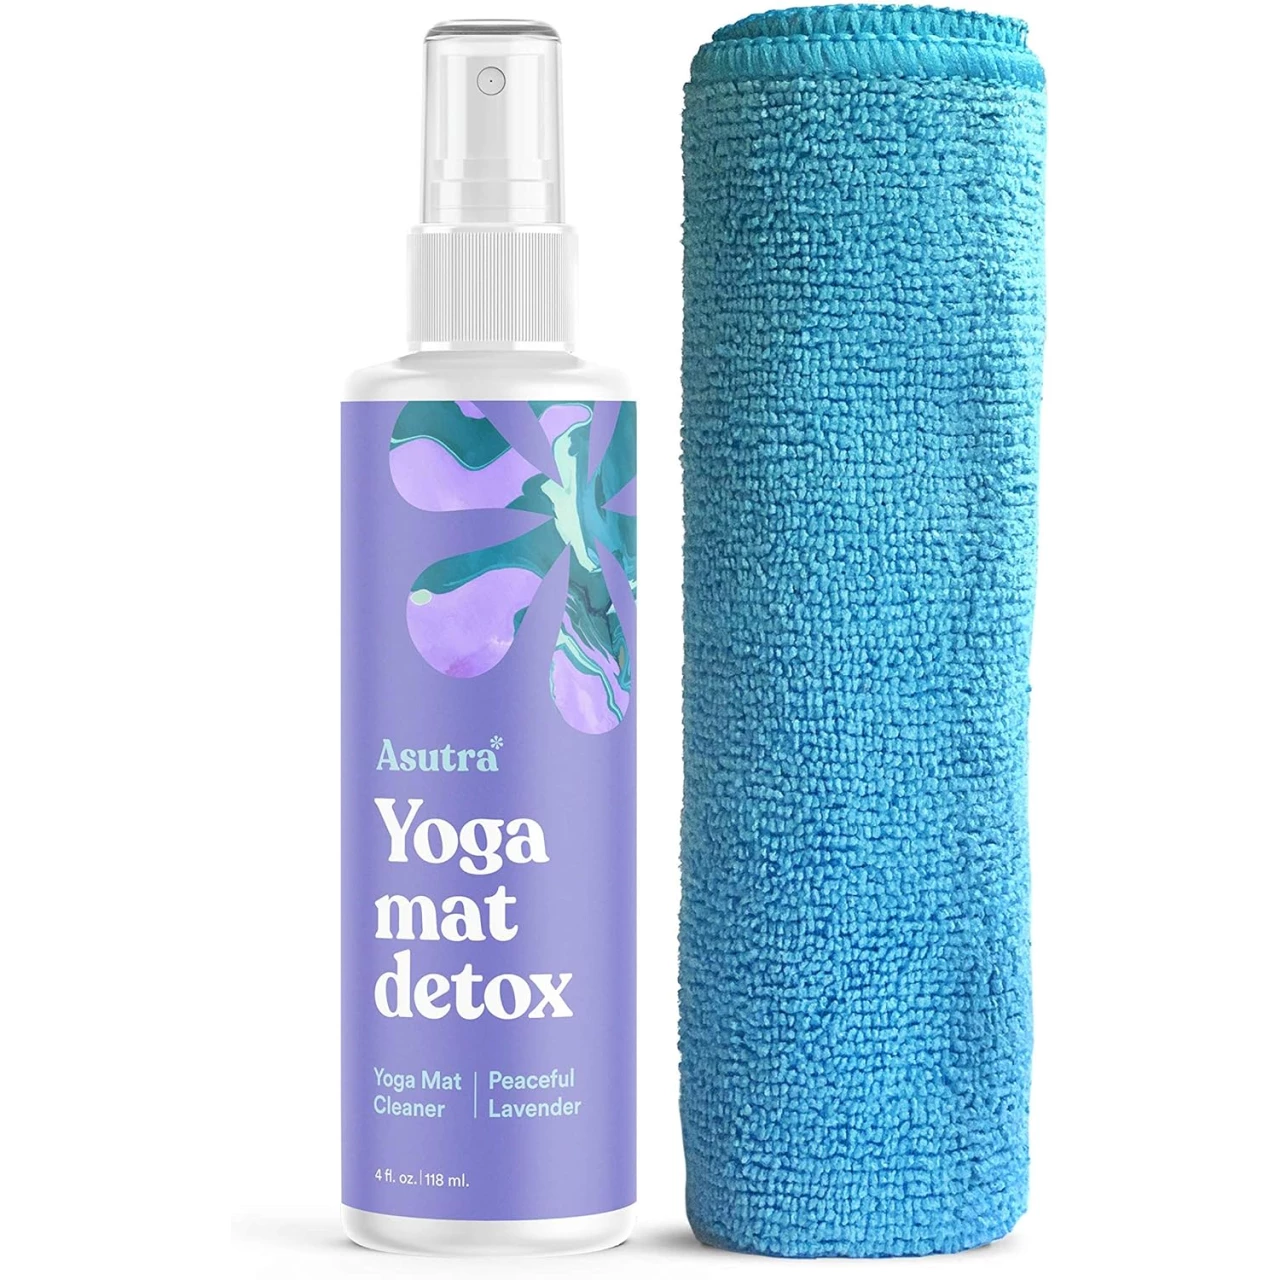 ASUTRA Natural &amp; Organic Yoga Mat Cleaner (Peaceful Lavender Aroma), 4 fl oz | Safe for All Mats &amp; No Slippery Residue | Cleans, Restores, Refreshes | Comes w/ Microfiber Cleaning Towel